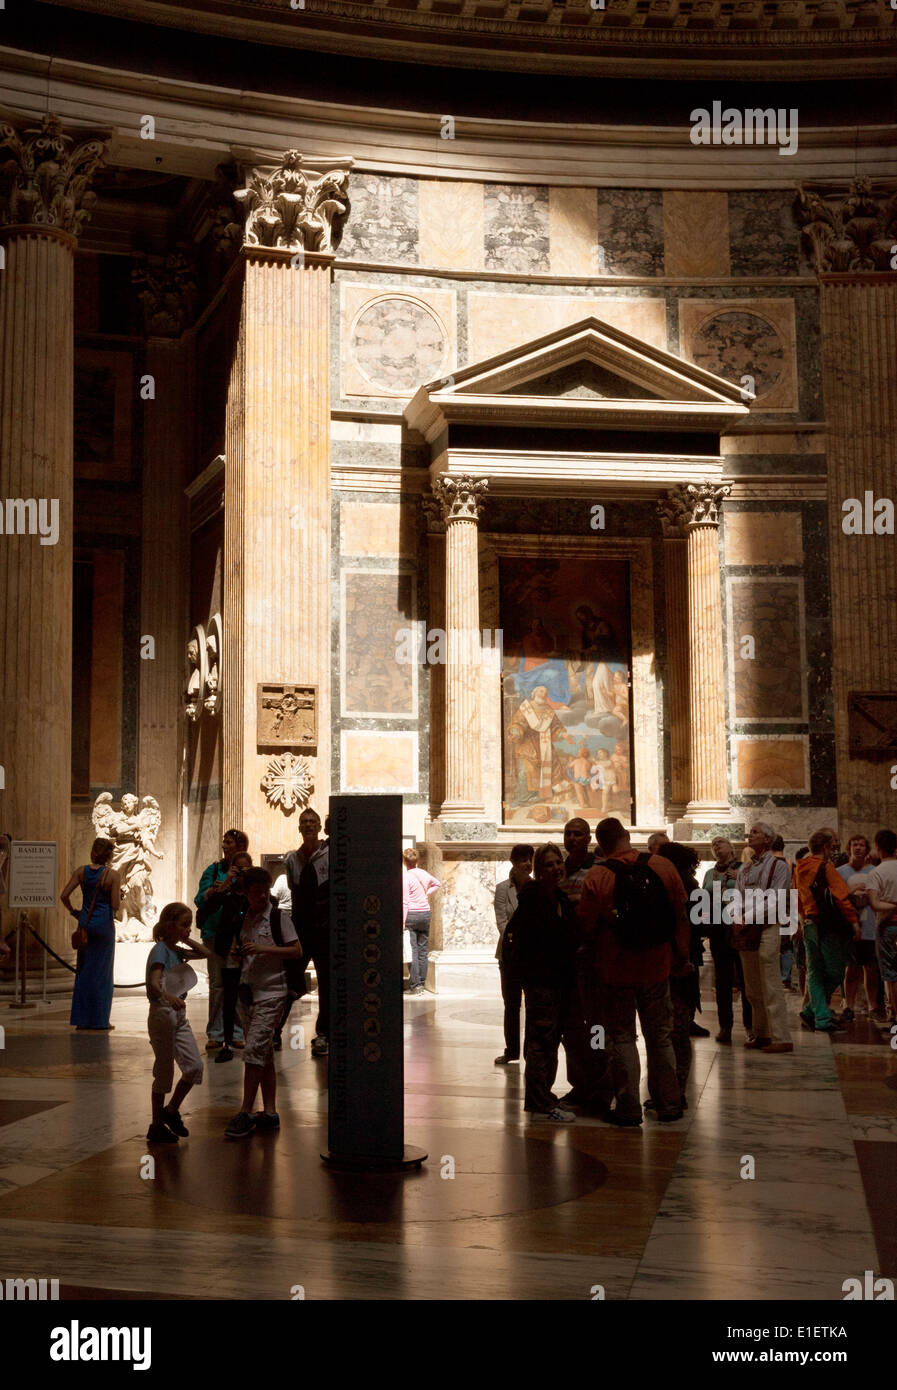 People in the interior, the Pantheon, Rome Italy Stock Photo